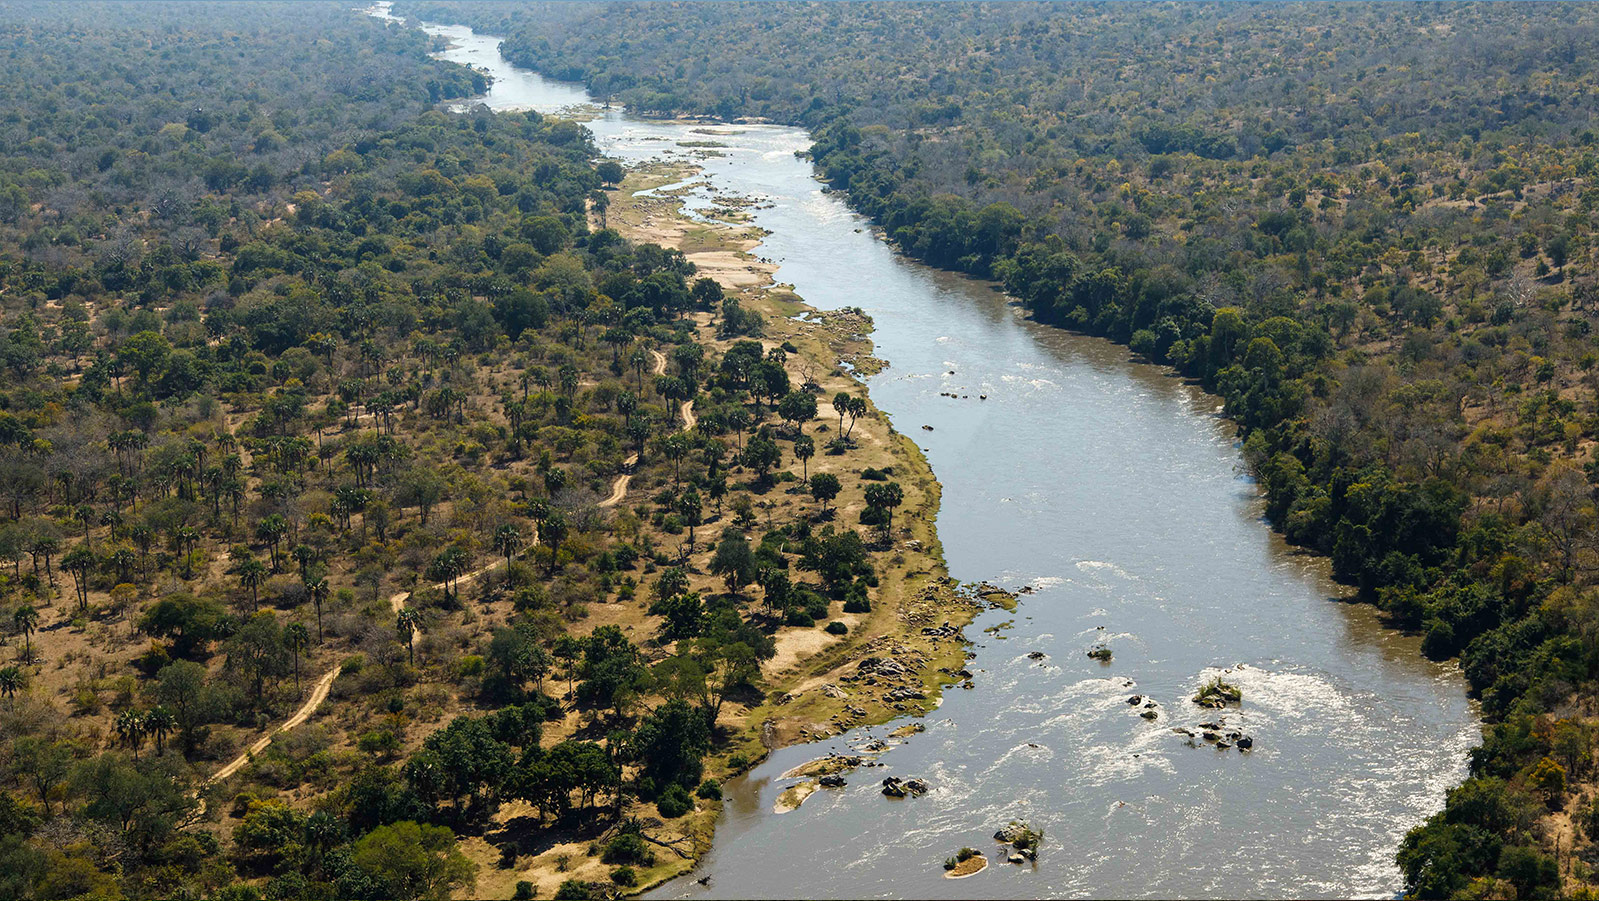 Aerial View of Shire river in Majete Wildlife Reserve